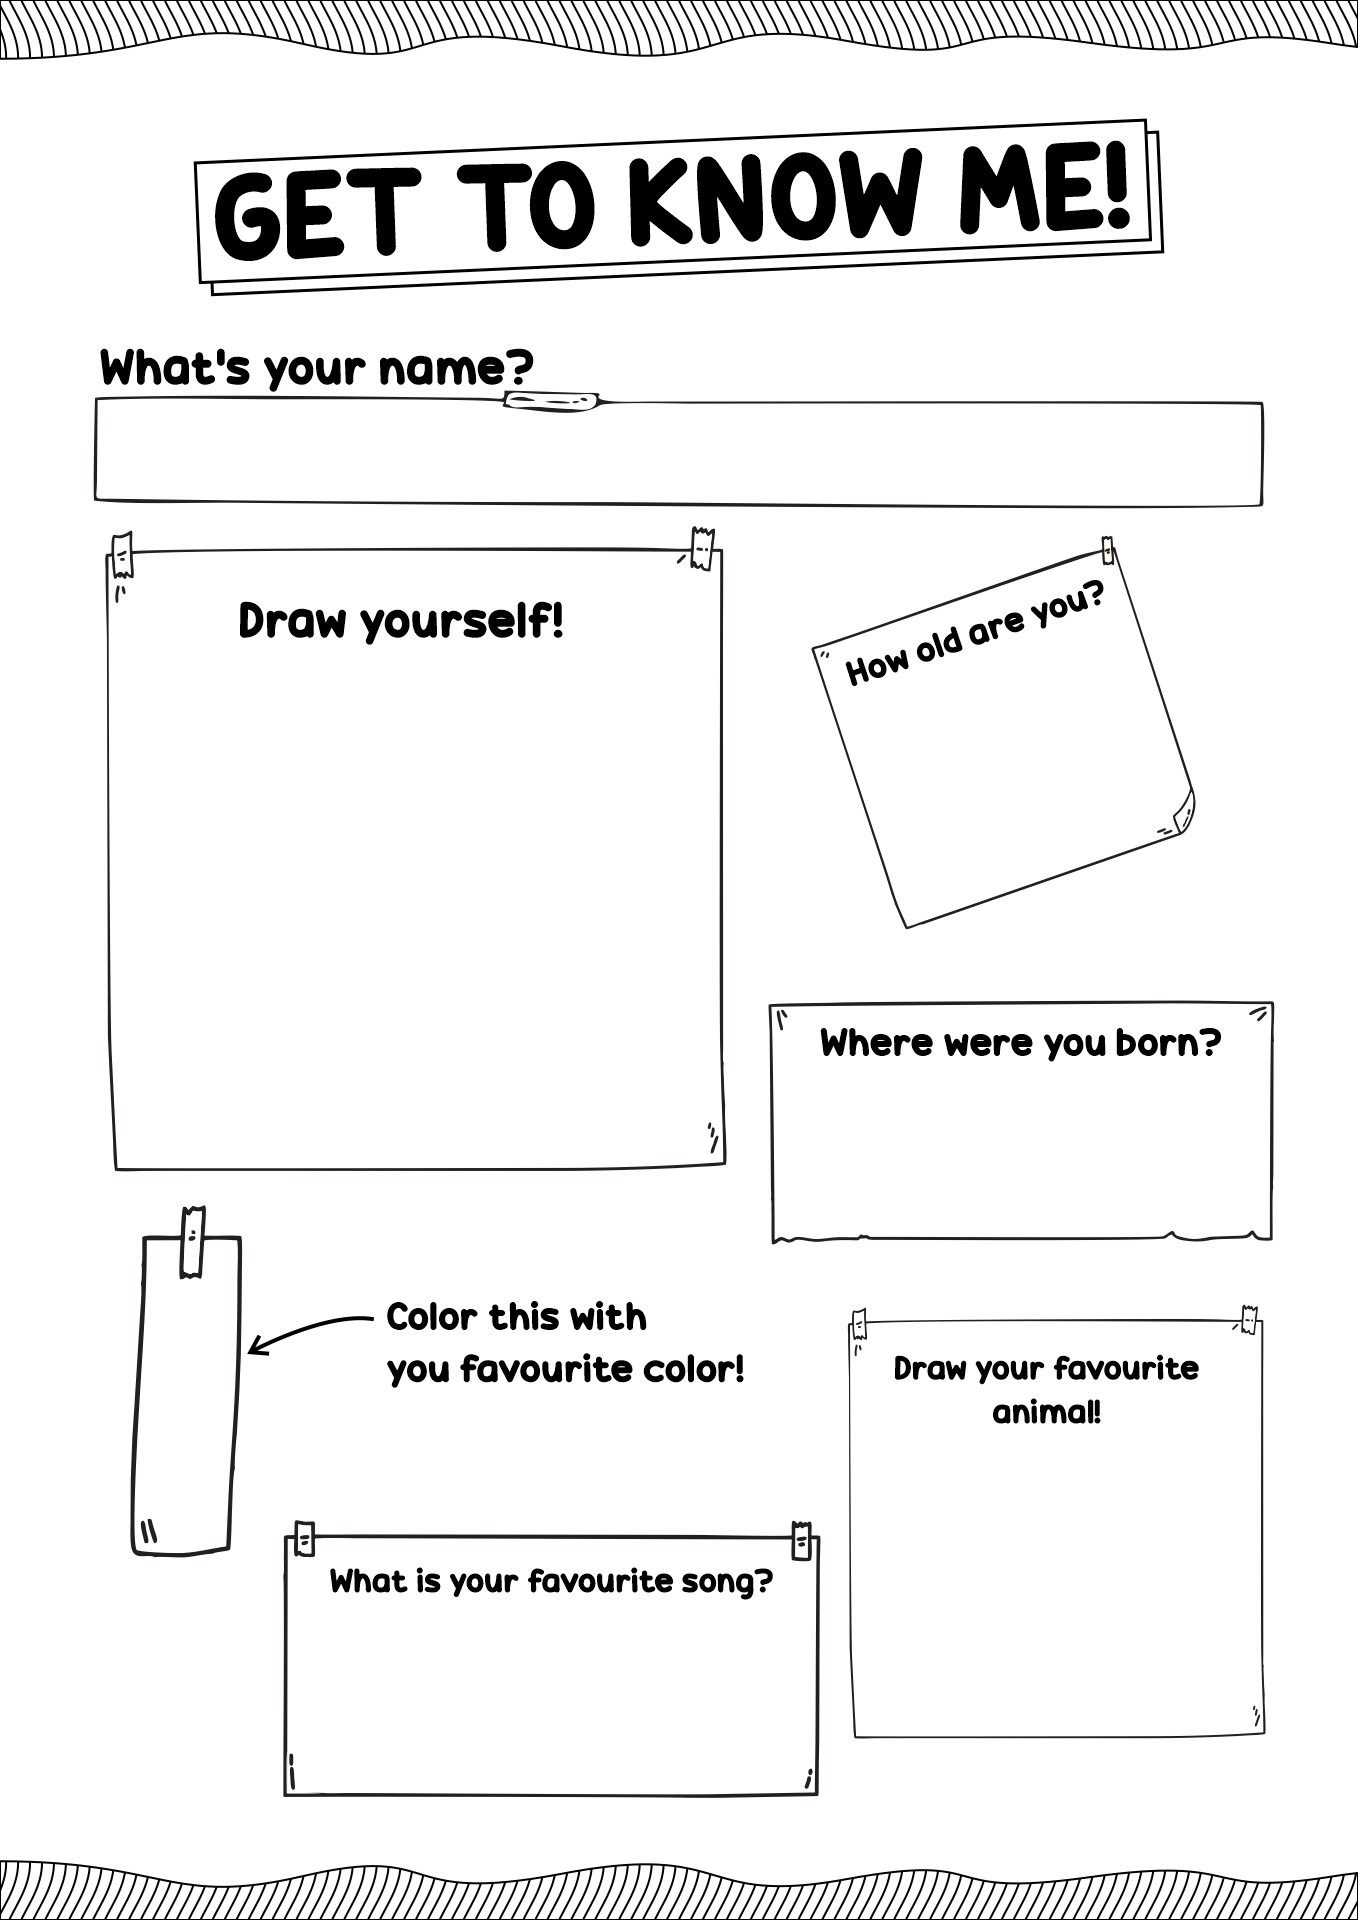 Getting to Know Me Worksheets for Students Image